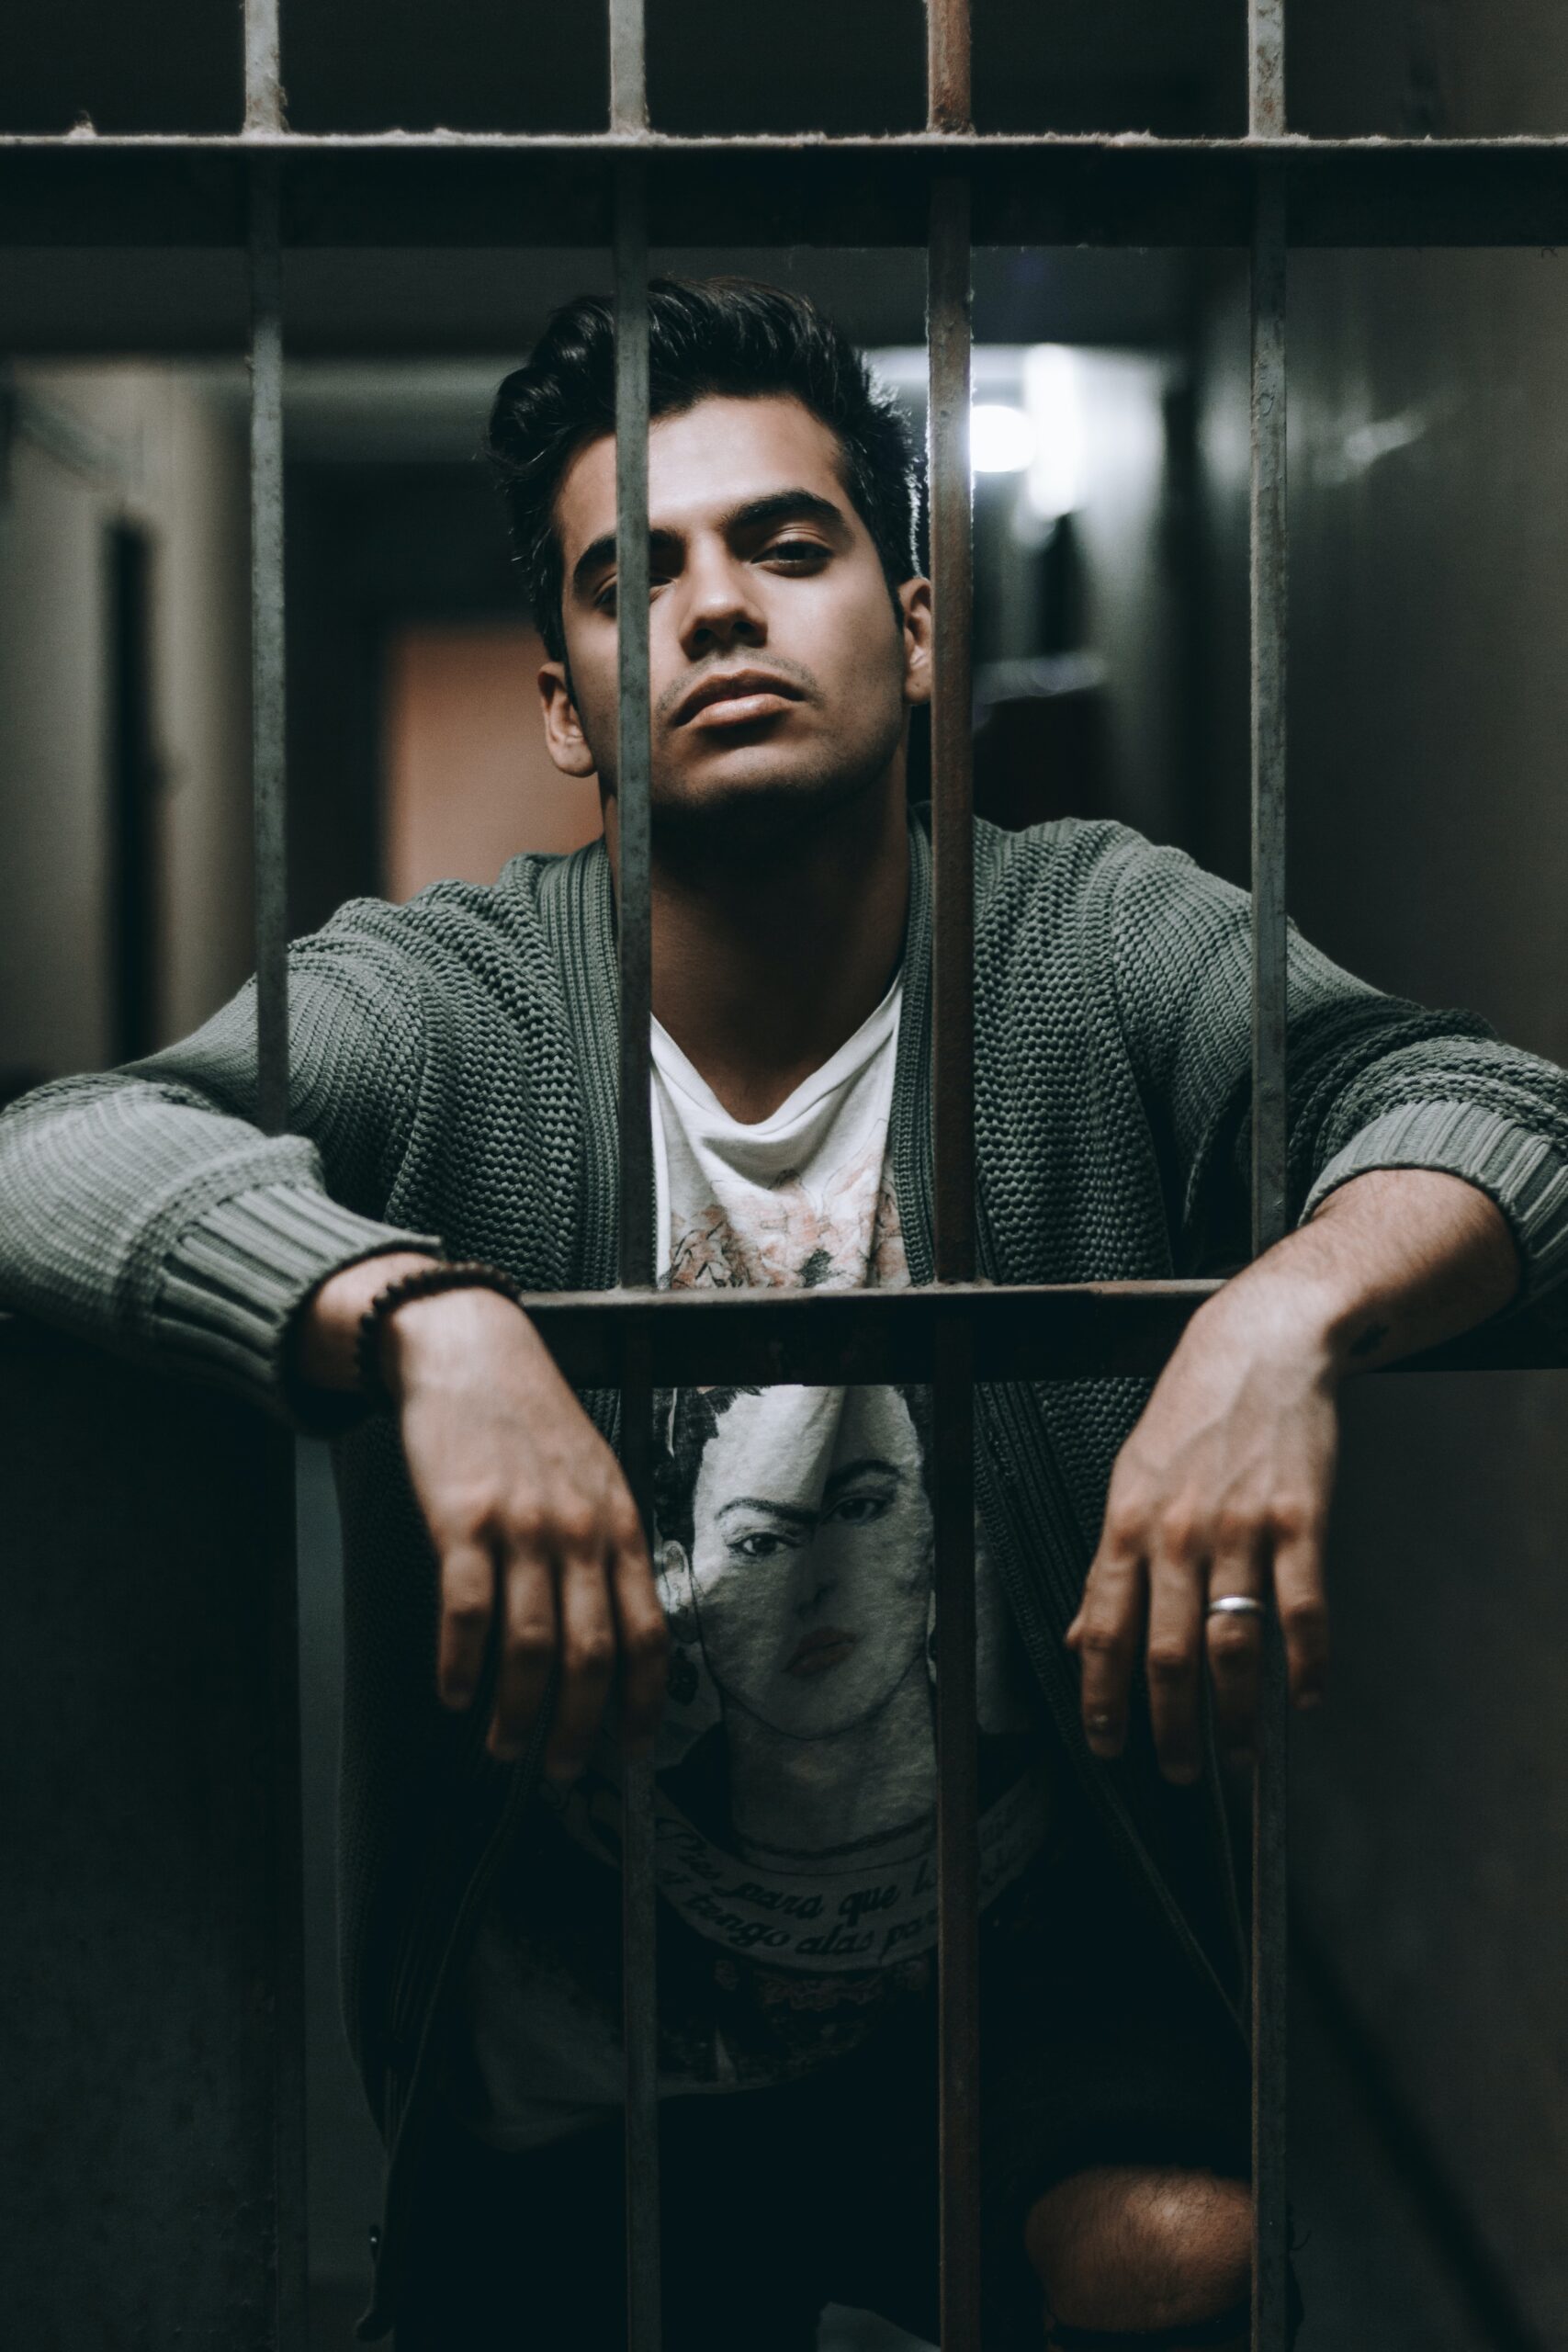 A young brown man behind bars in a green jumper